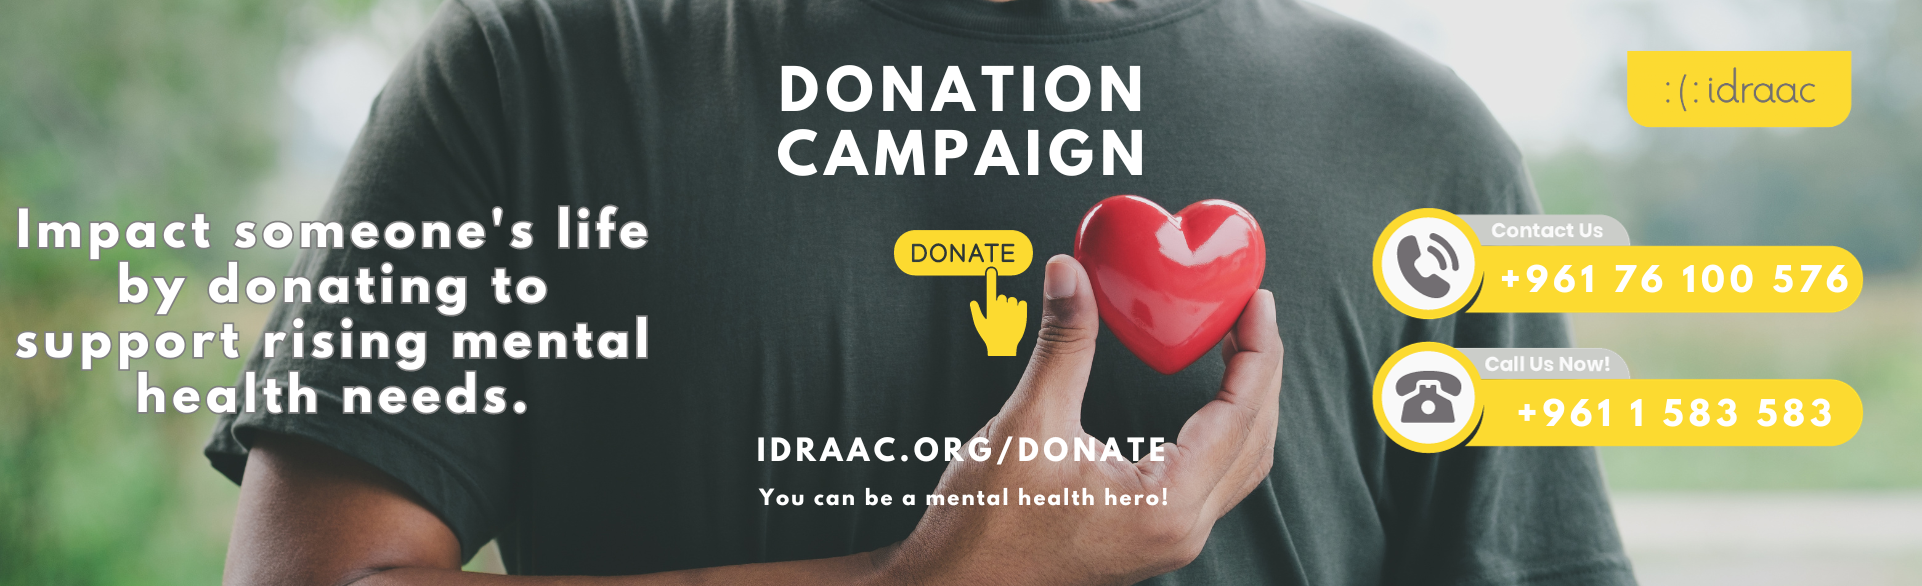 Idraac launches a donation campaign